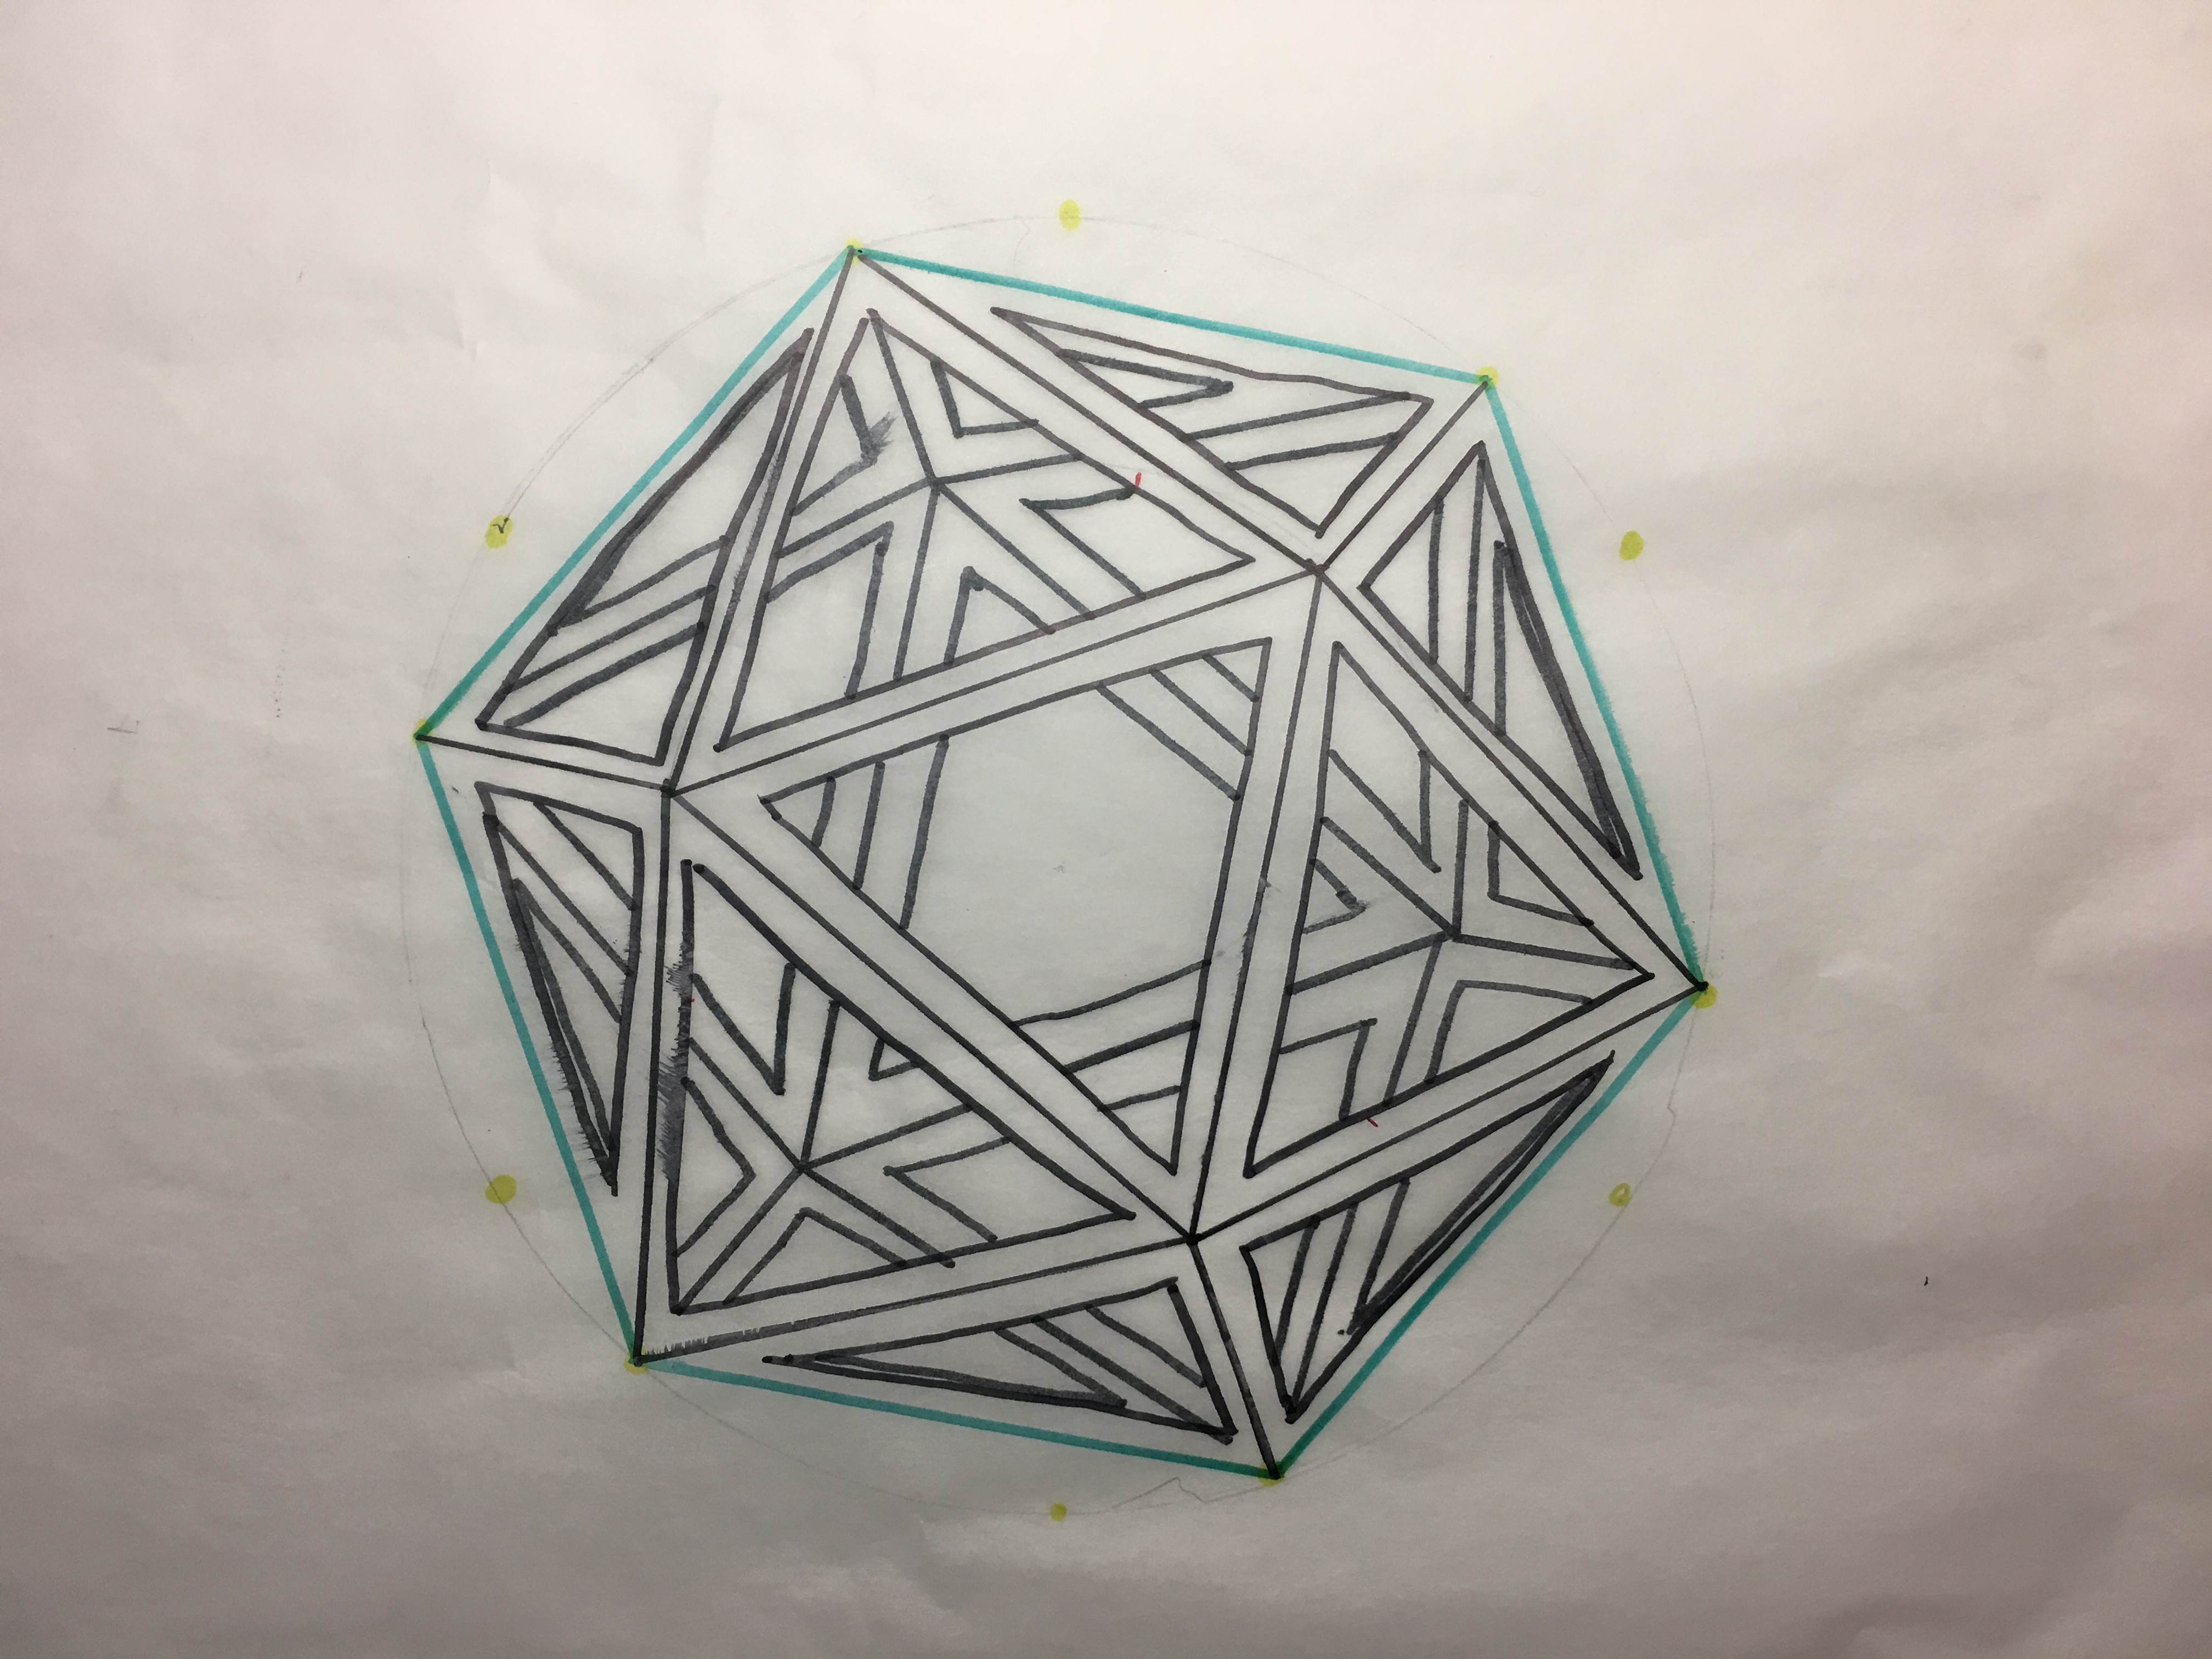 Space: Individual Platonic Solids